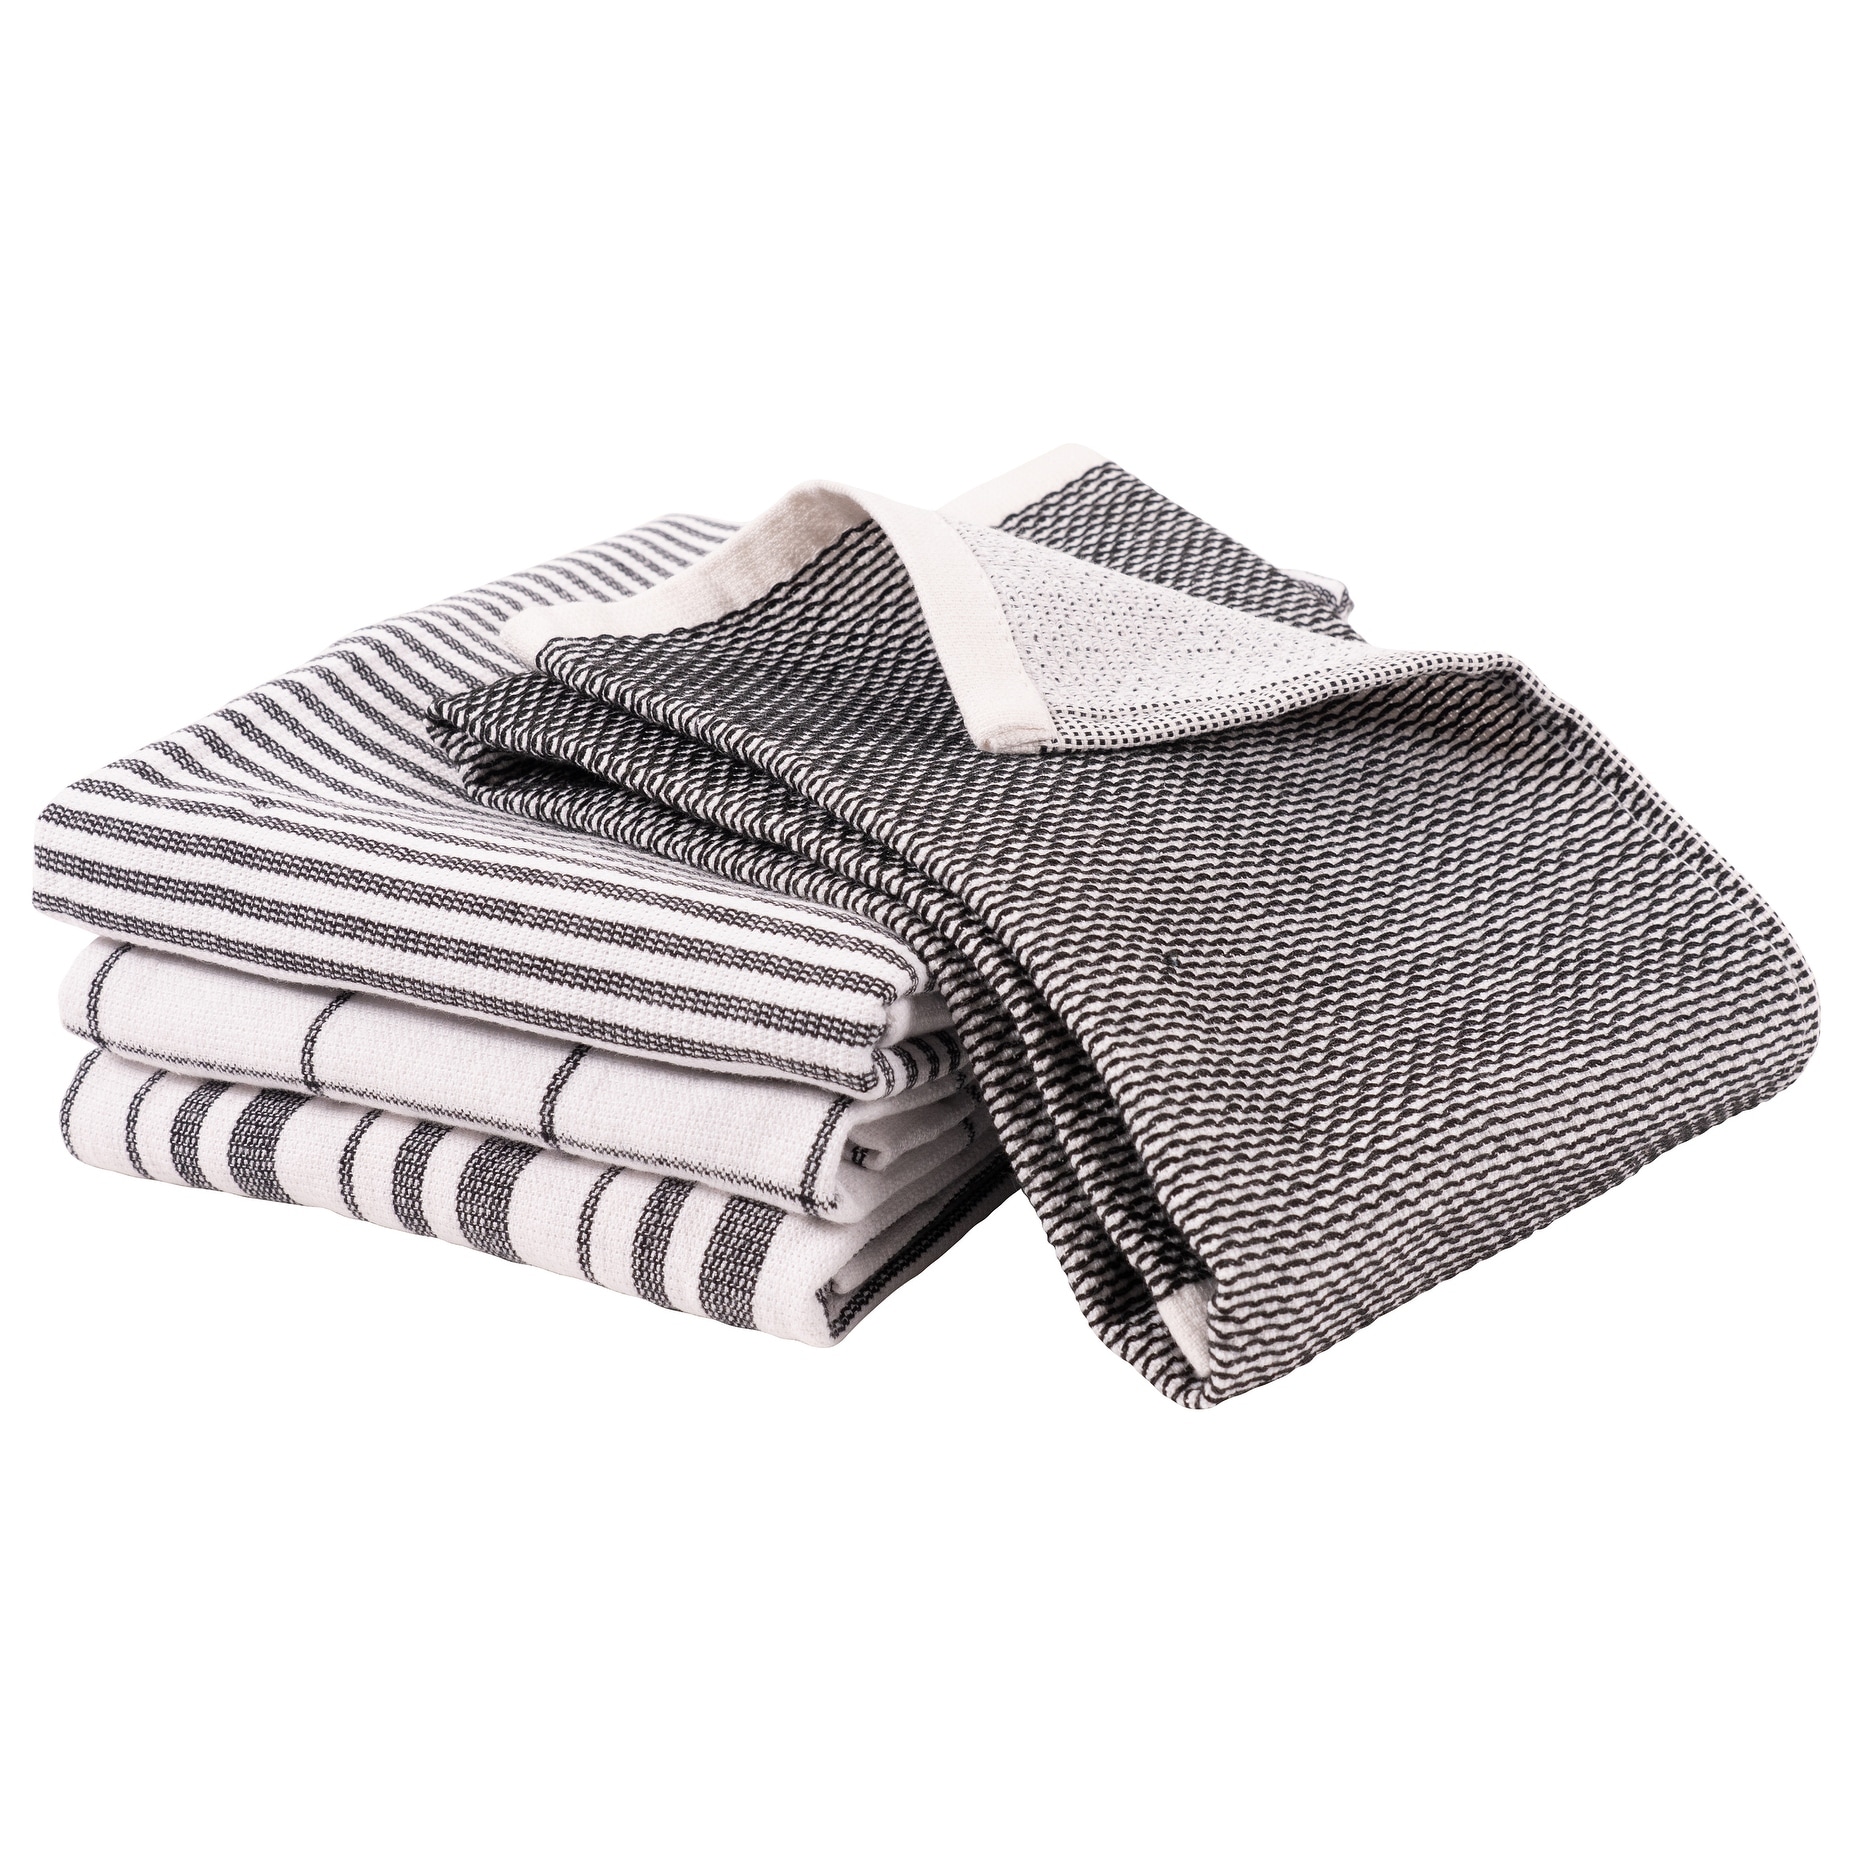 Our Table Solid Kitchen Towels in Rust Set of 2 - Each